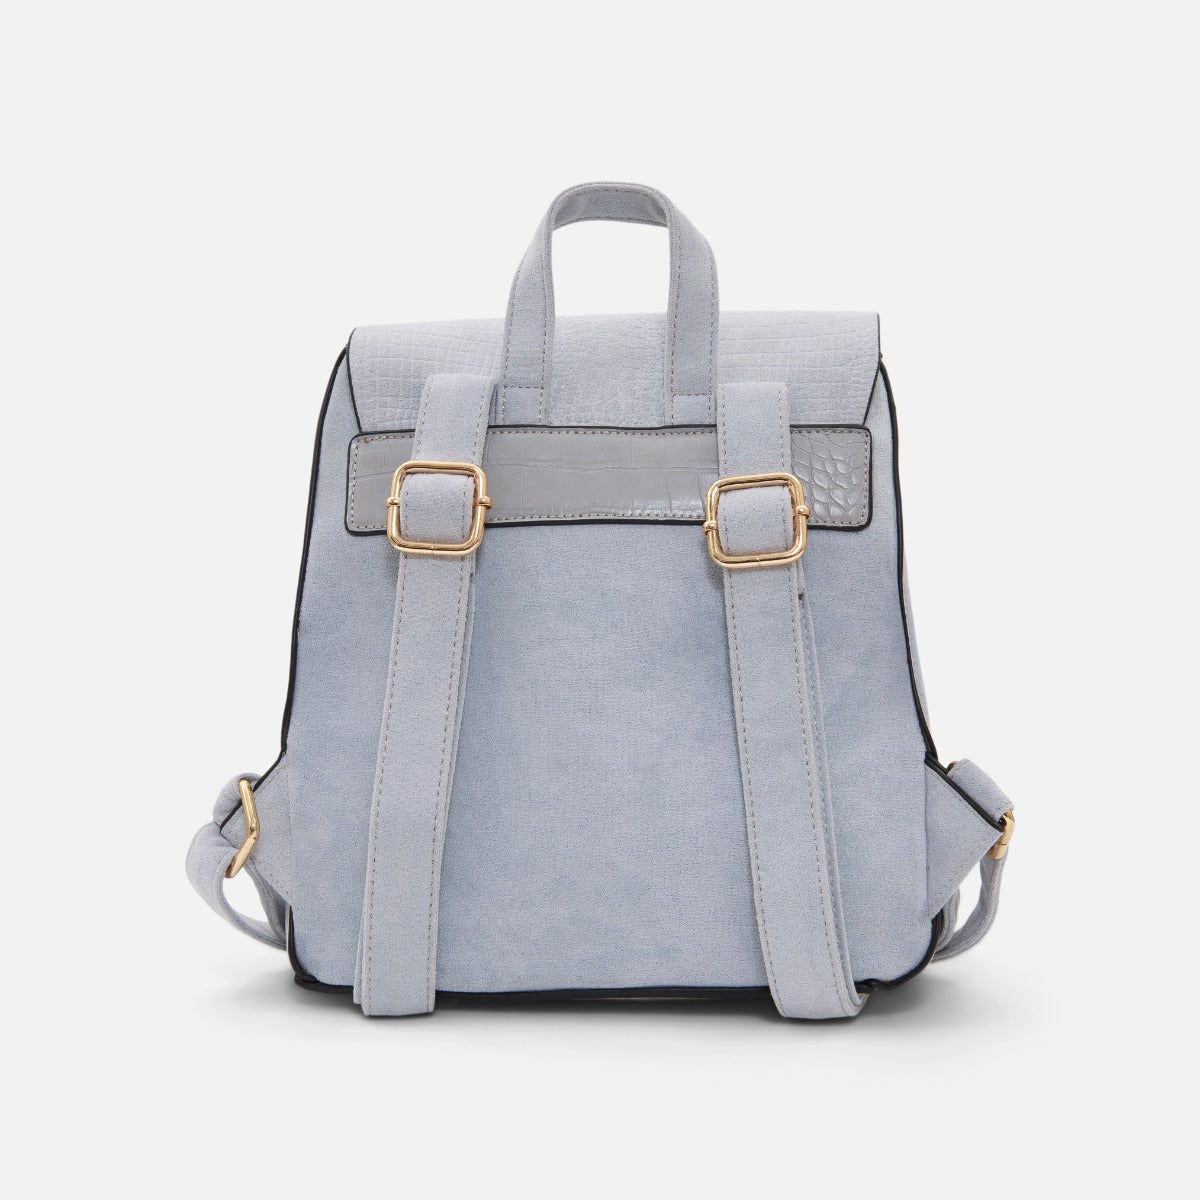 Grey-blue snakeskin effect backpack with flap and front pocket